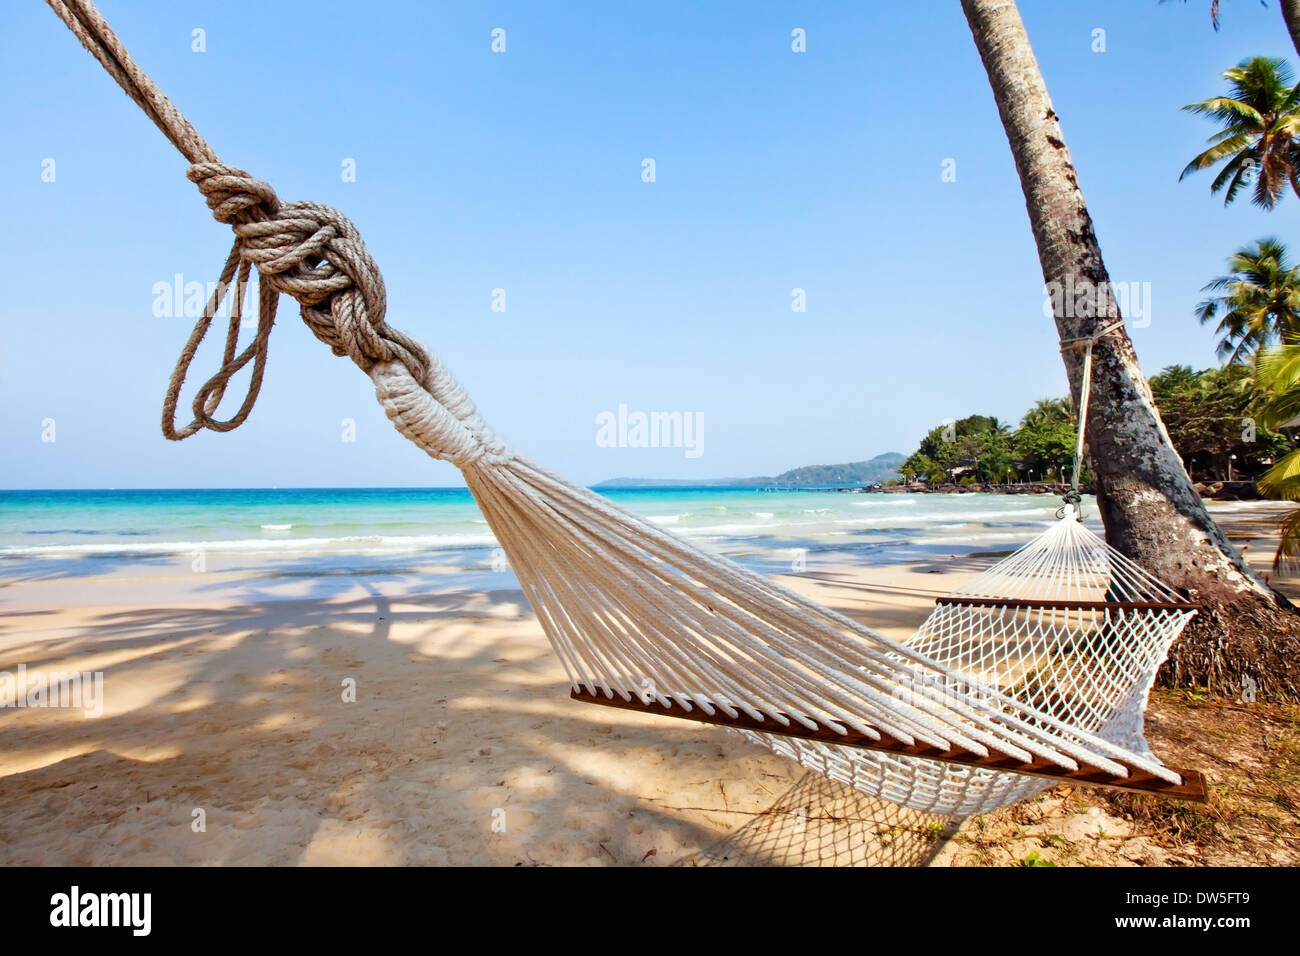 relaxation on exotic tropical beach Stock Photo